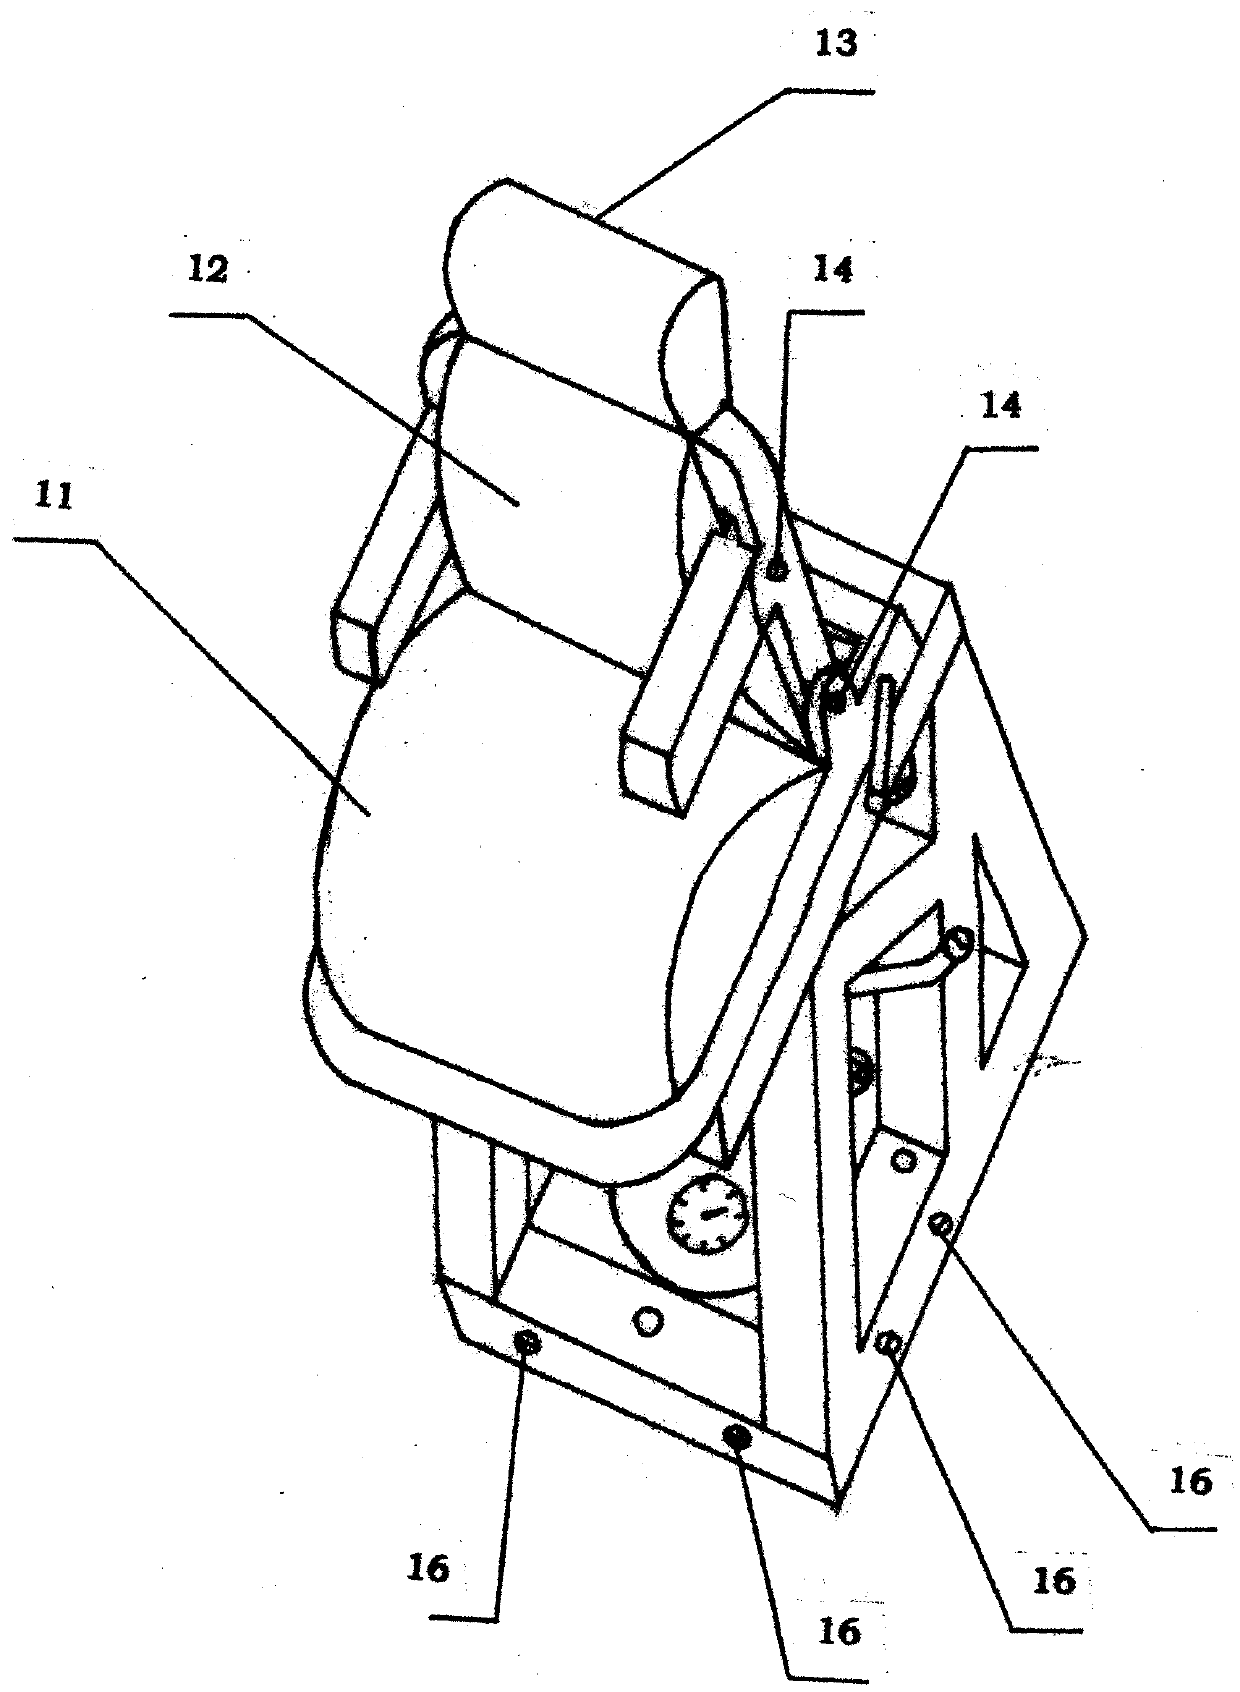 Fully automatic driver's safety seat for large, medium and small passenger vehicles